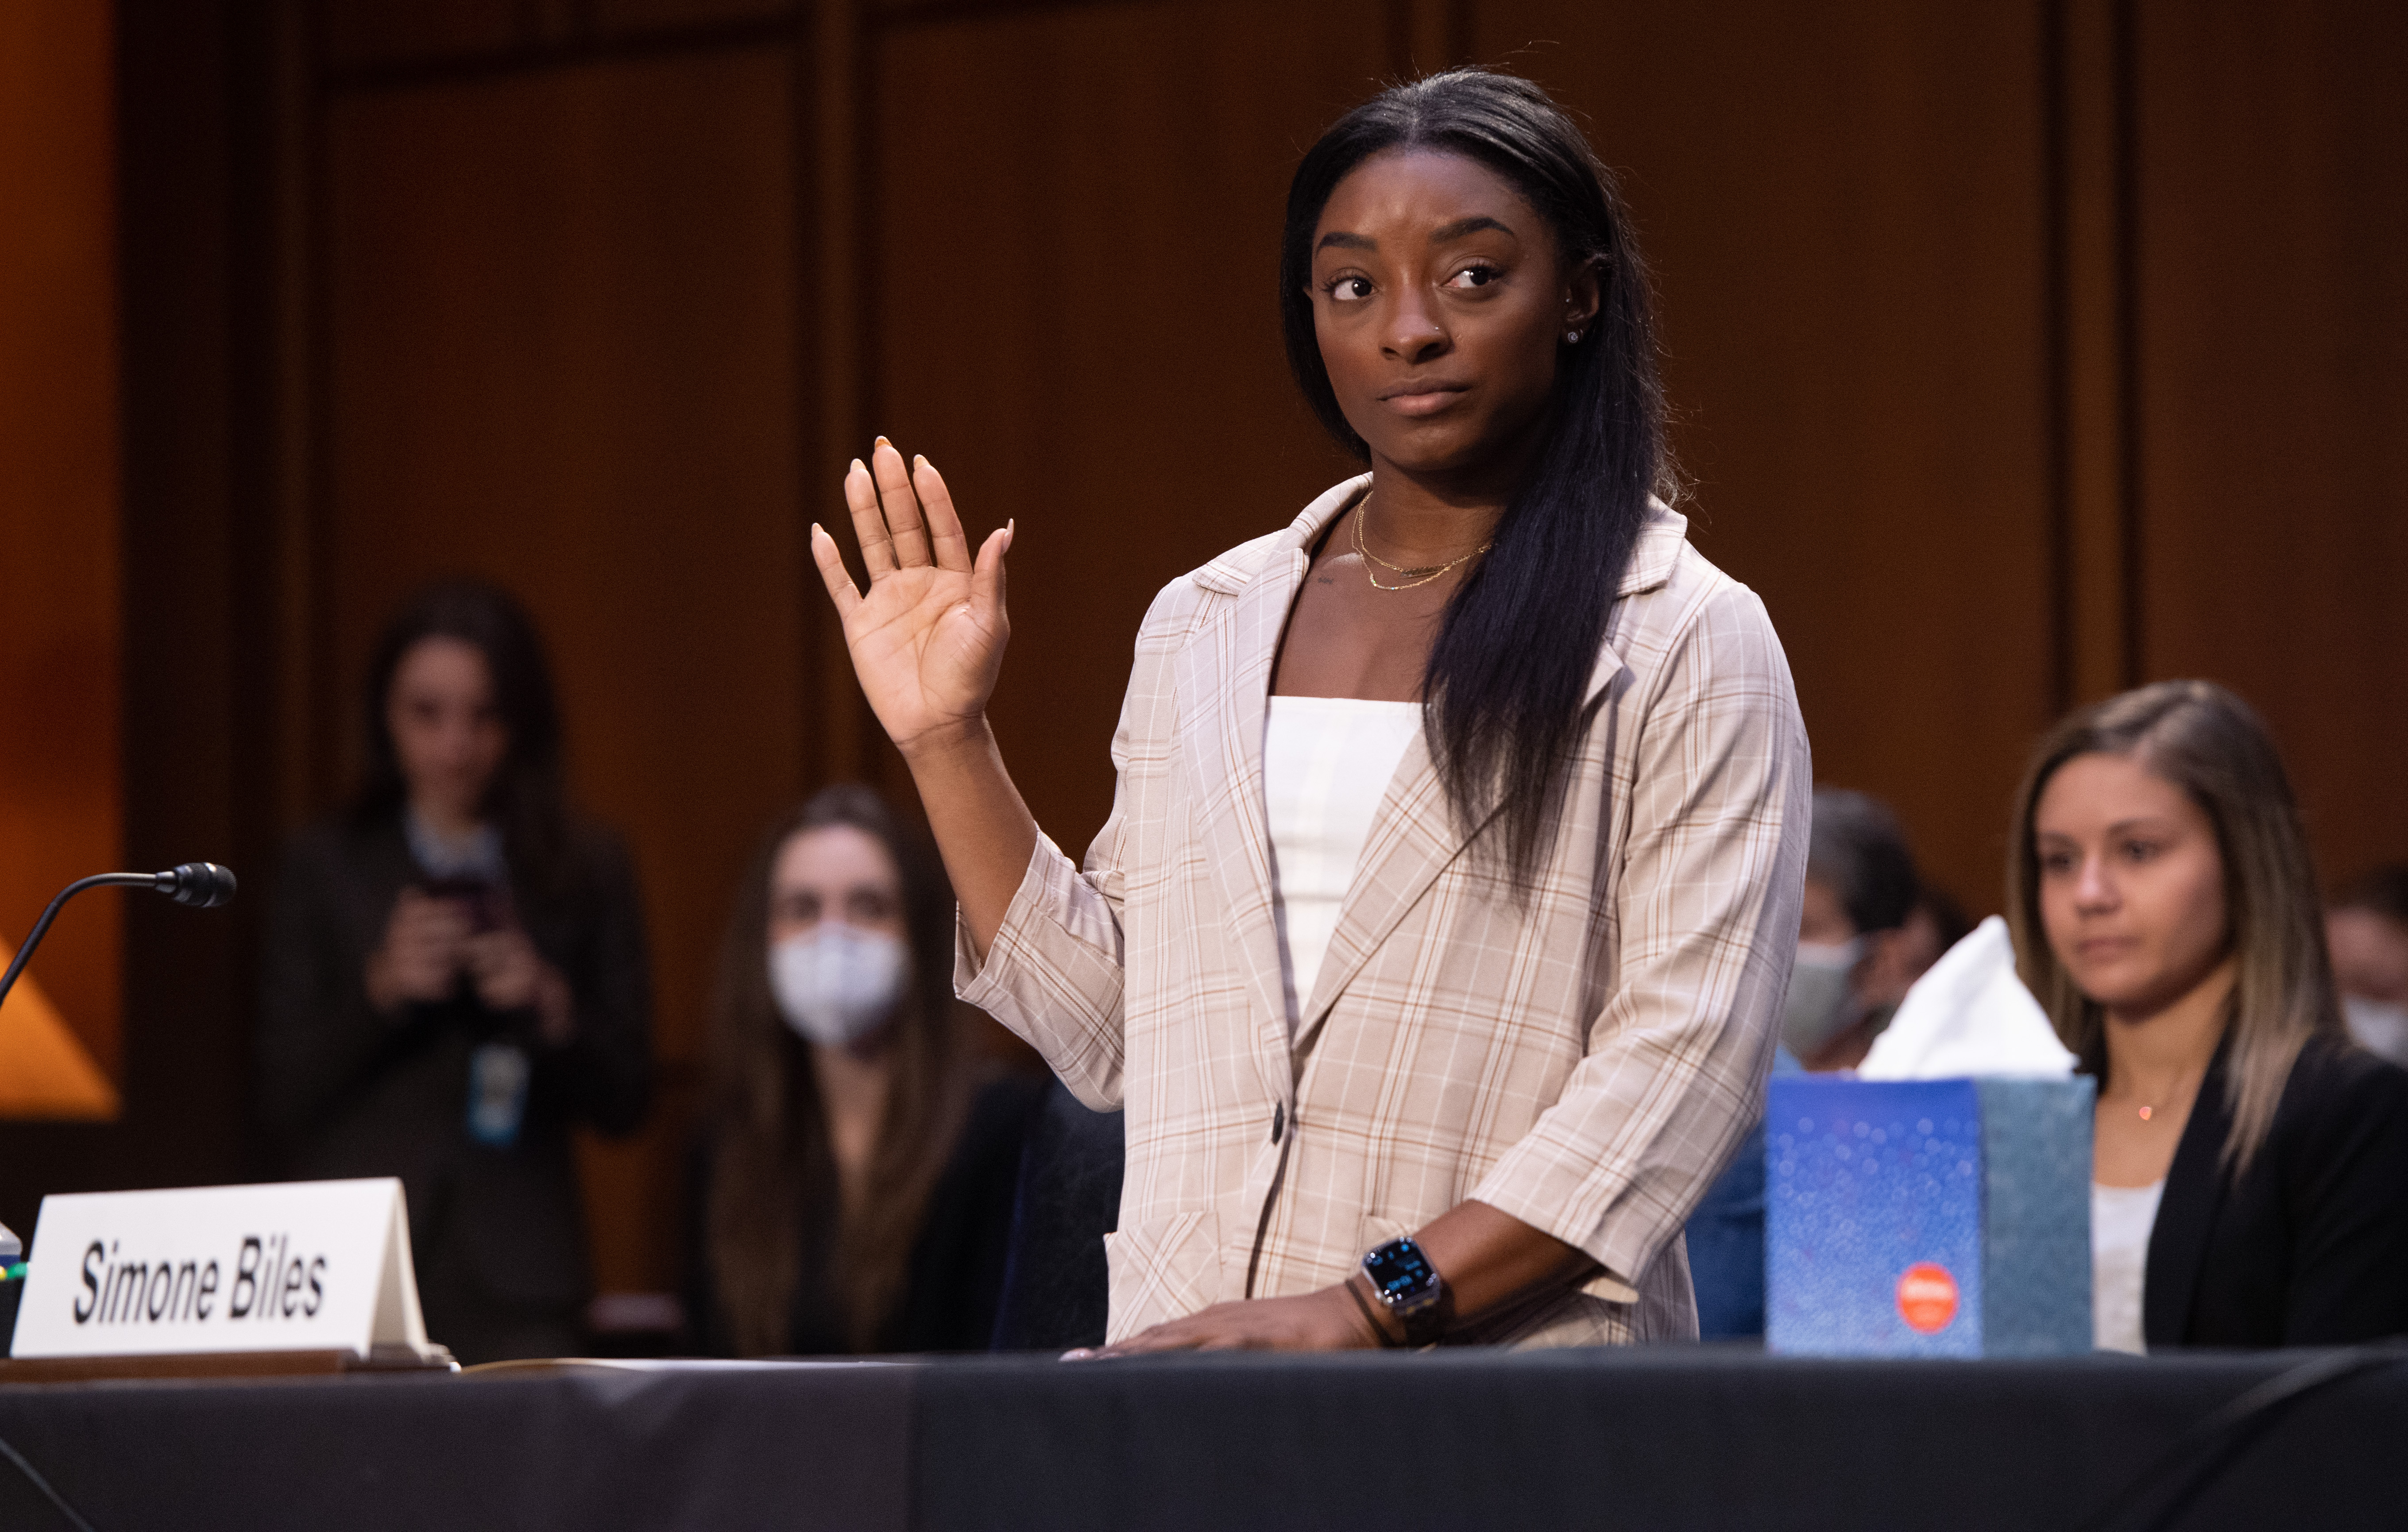 US Olympic gymnast Simone Biles is sworn in to testify during a Senate Judiciary hearing about the Inspector General's report on the FBI handling of the Larry Nassar investigation of sexual abuse.